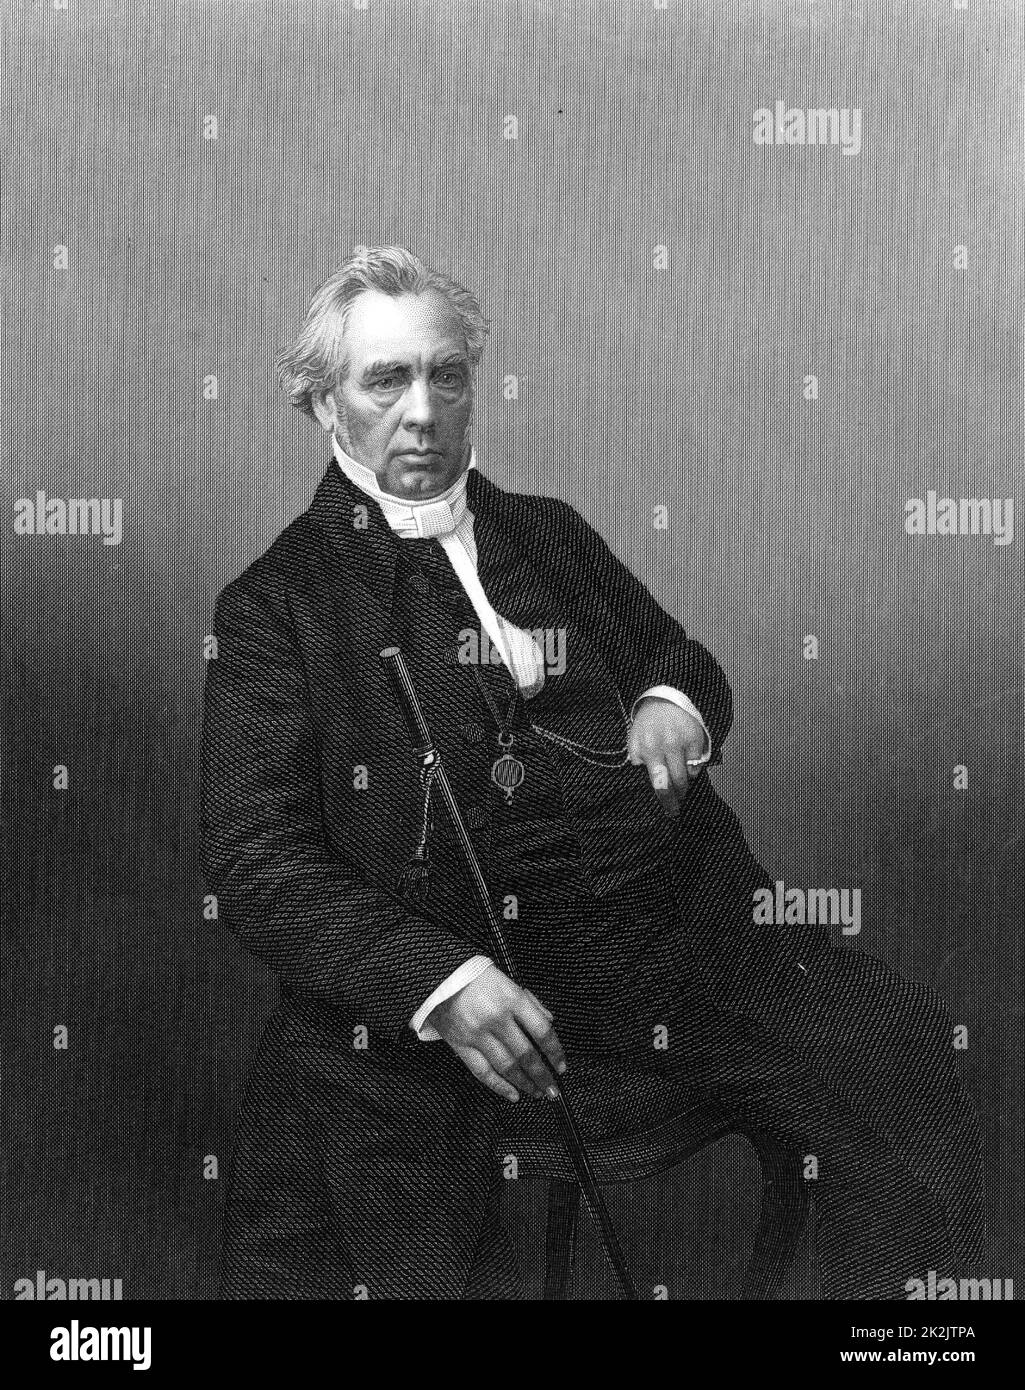 Samuel Dousland Waddy (1804-1876) English Wesleyan minister born at Burton-on-Trent. President of the Wesleyan Conference 1859. Engraving from 'The Illustrated News of the World' (London, c1860). British Religion Christian Protestant Non-Conformis. Stock Photo